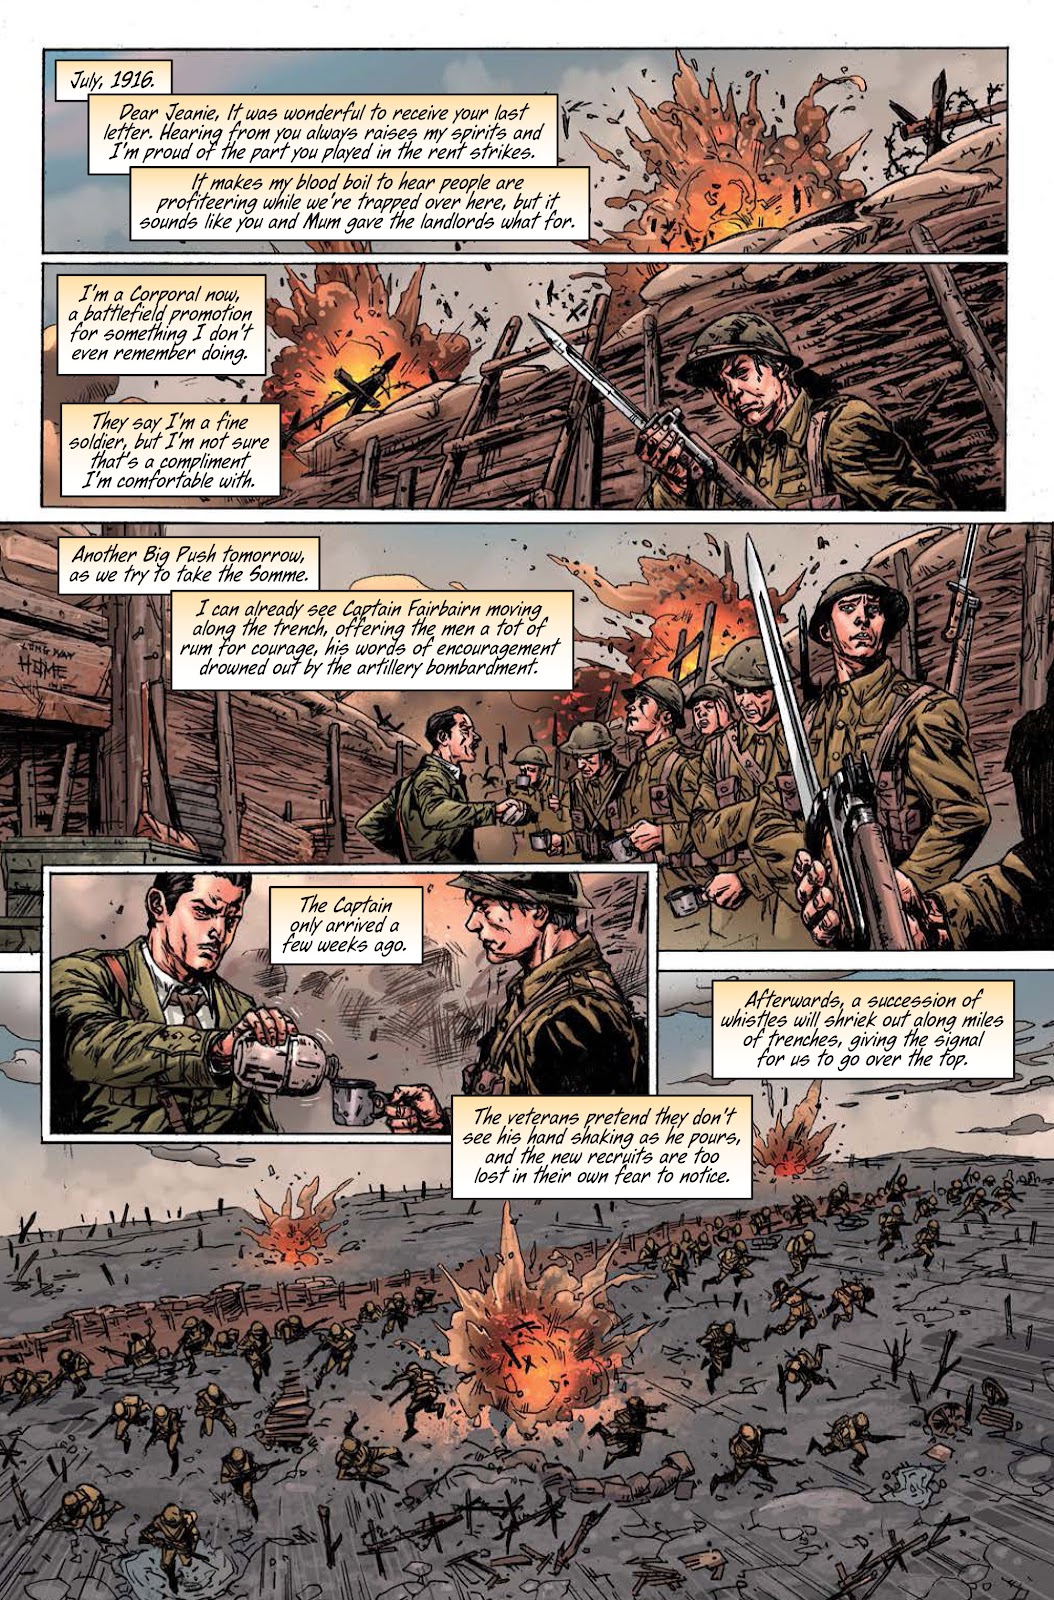 Doctor Who: The Tenth Doctor issue 6 - Page 16